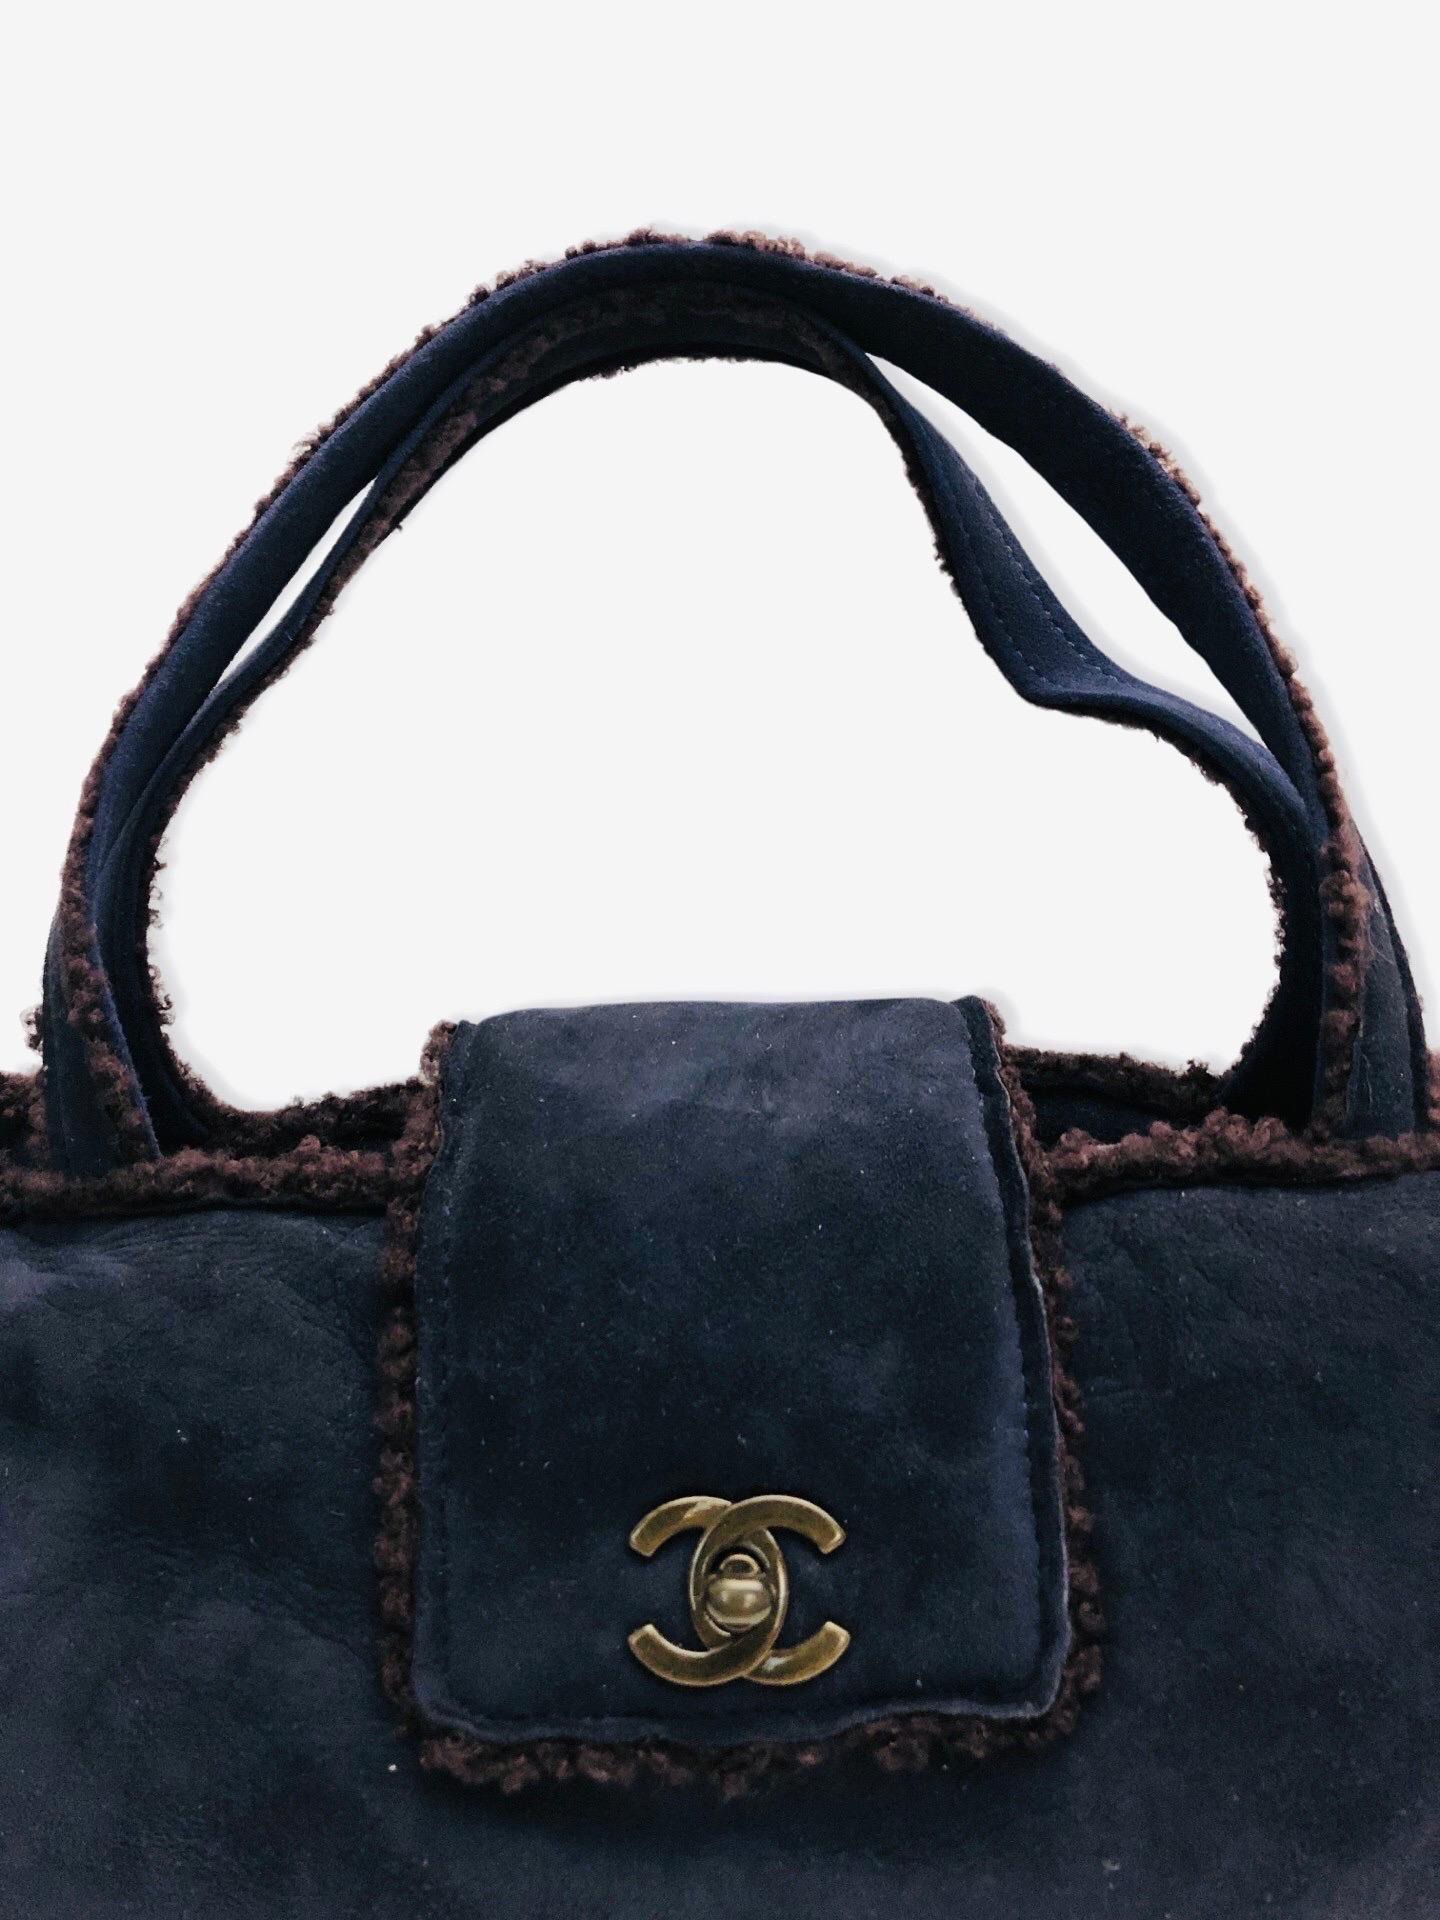 - Chanel navy blue suede shoulder shoulder handbag from 1998 collection. 

- Featuring brown shearling mouton trim overall. 

- CC turnlock flap closure. 

- Interior zip pocket. 

- Length: 32cm. Height: 16cm. Width: 7.5cm. Handle Drop: 18cm